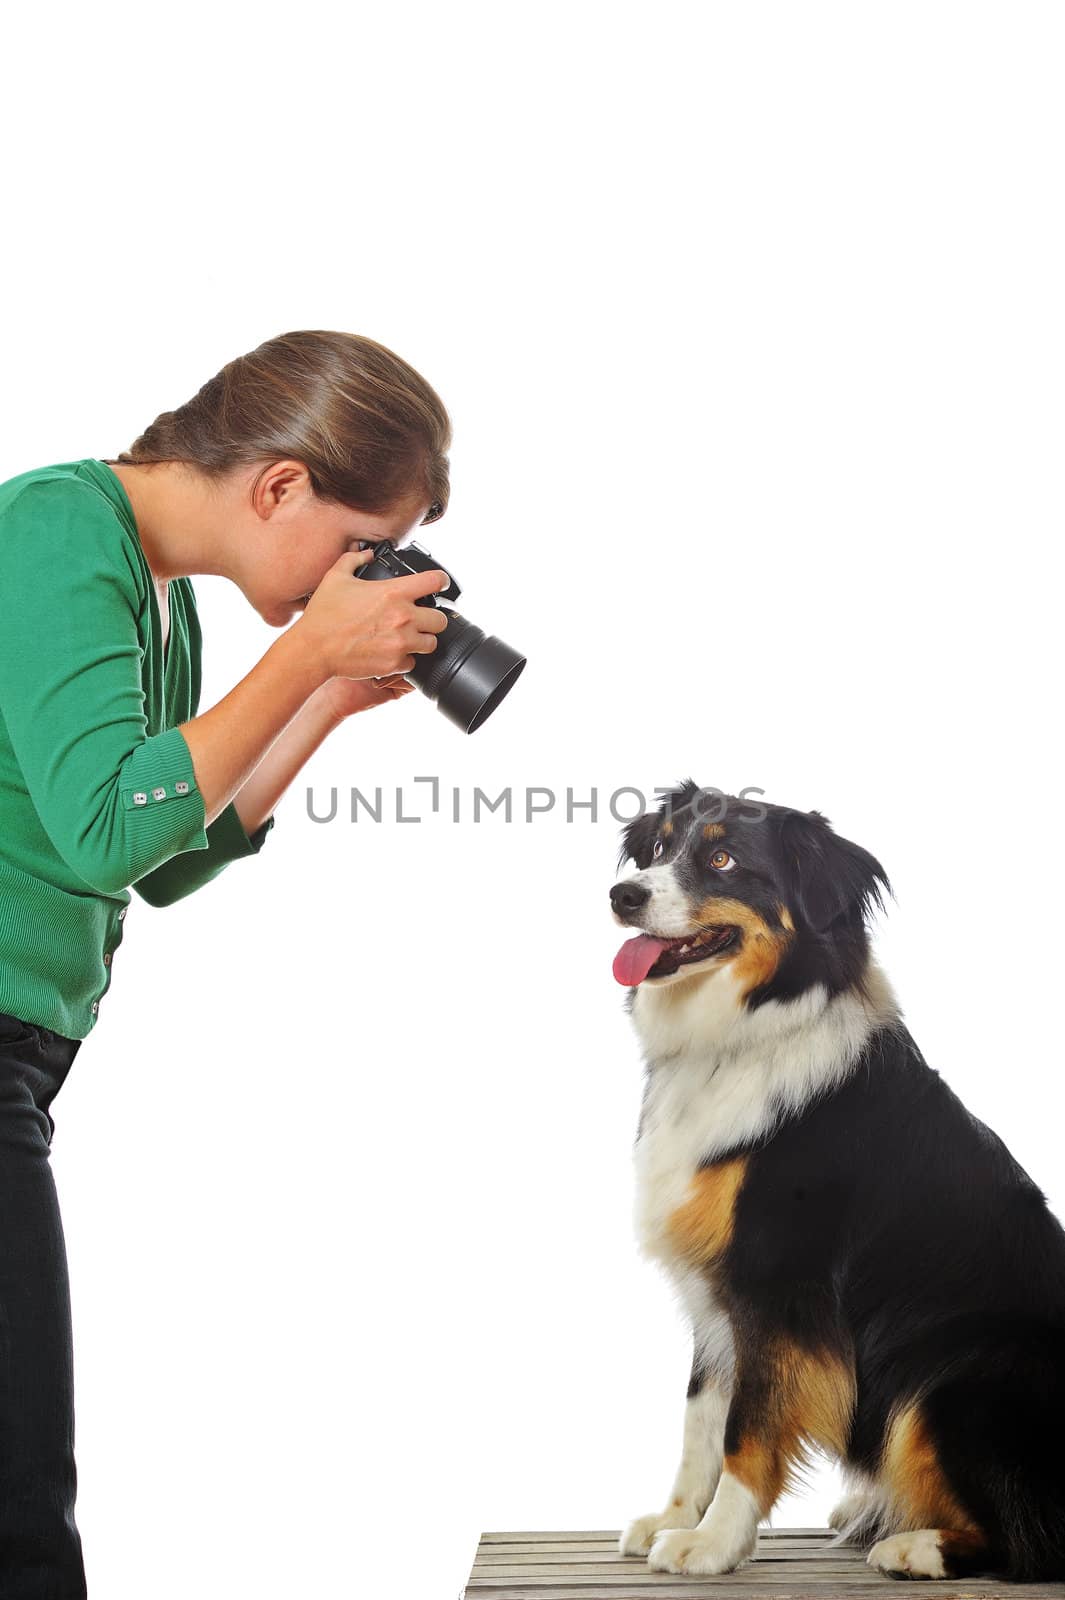 Photographing a dog by Bateleur